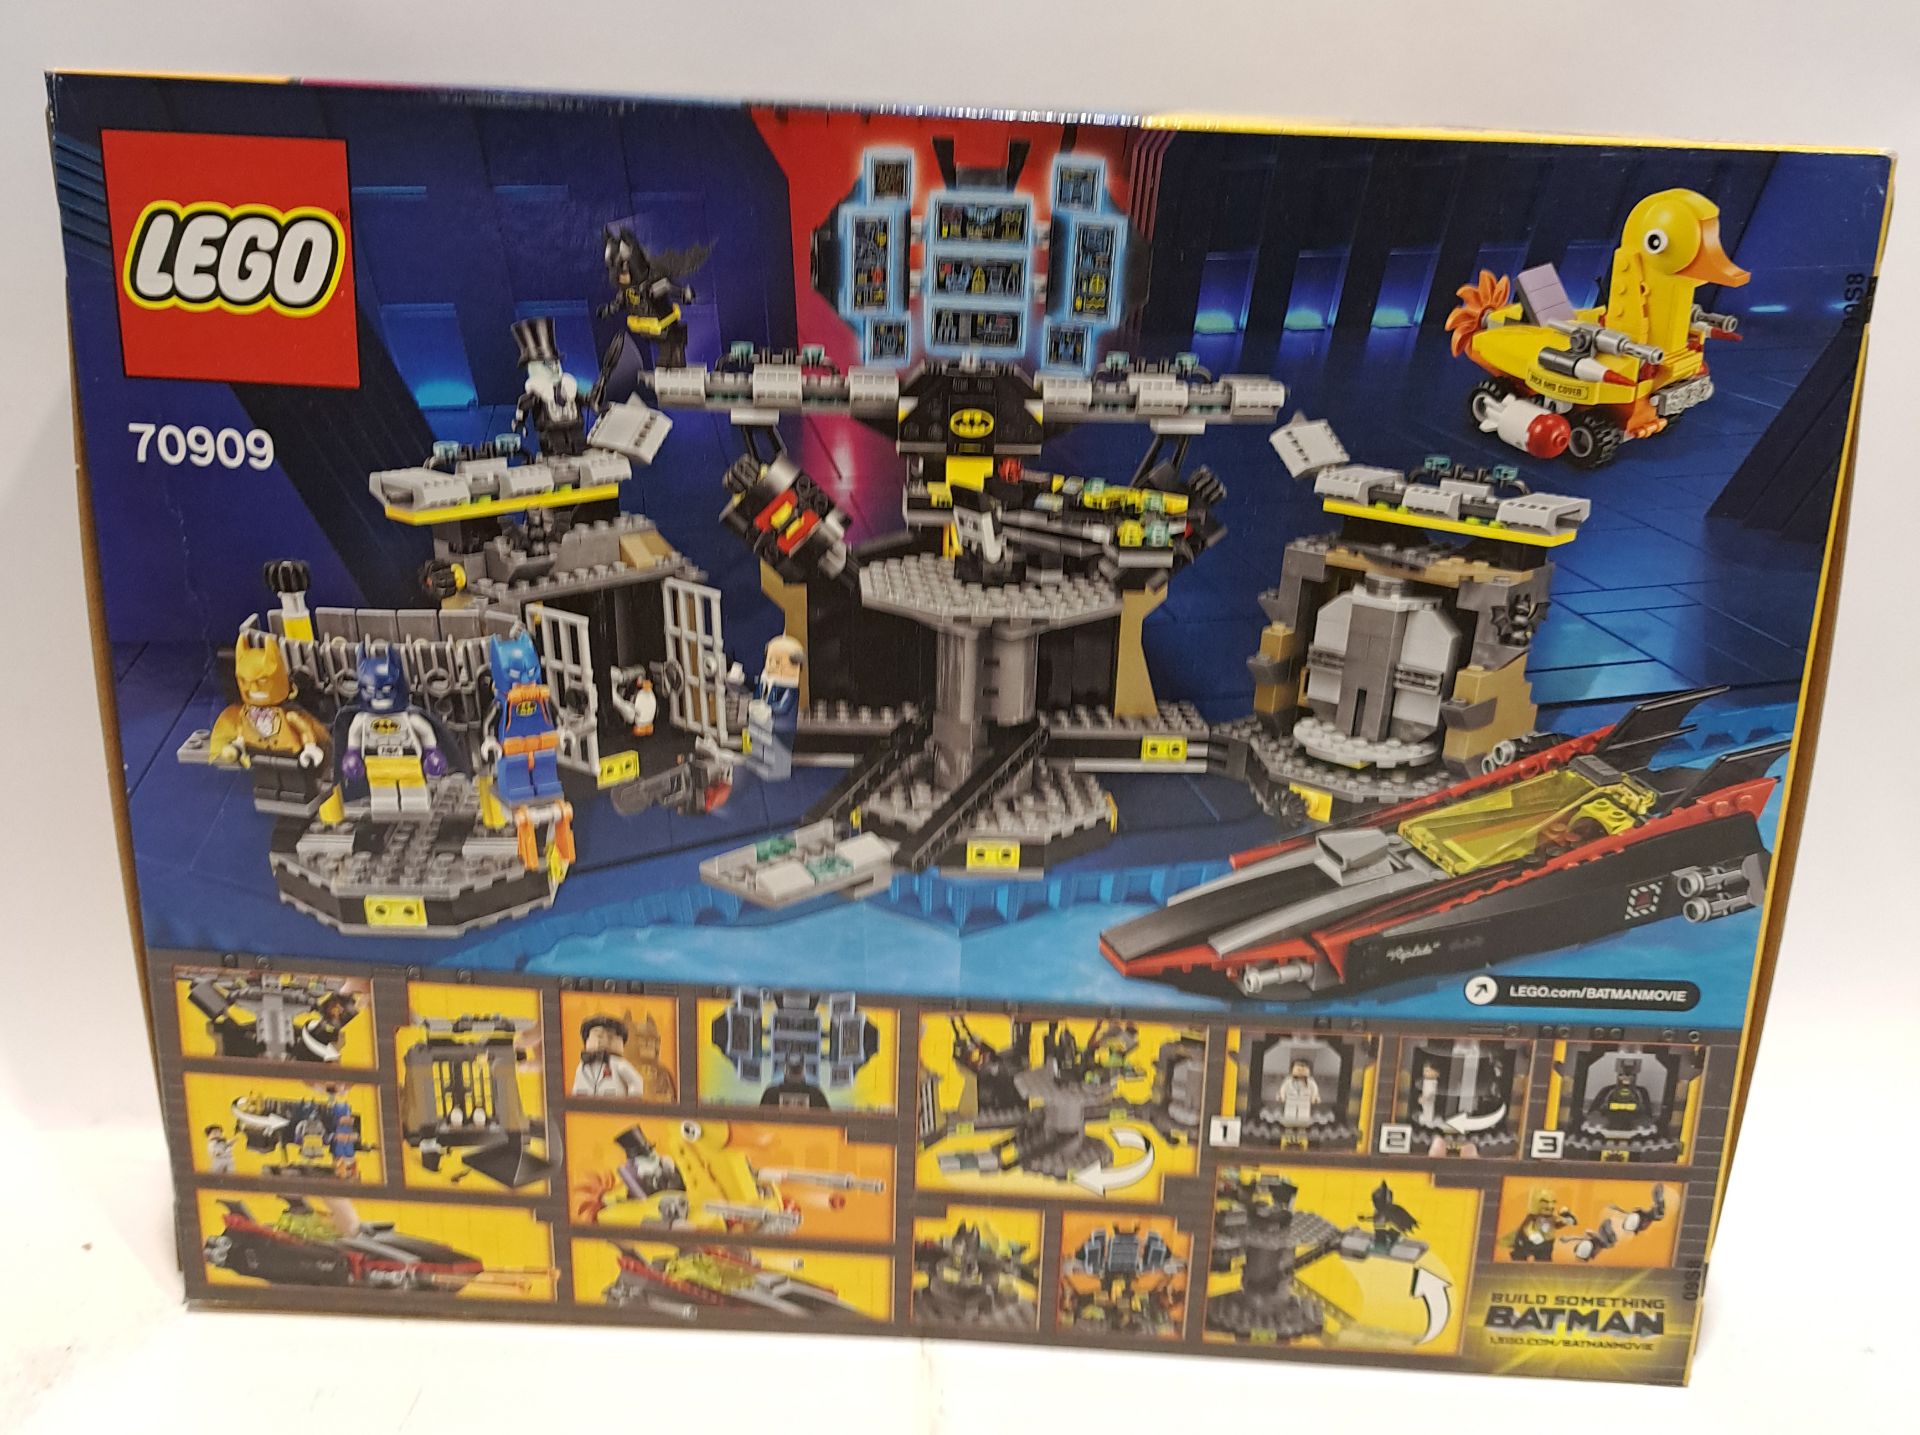 Lego 70909 The Batman Movie - Batcave Break-in, within Excellent Plus sealed packaging (minor mar... - Image 2 of 2